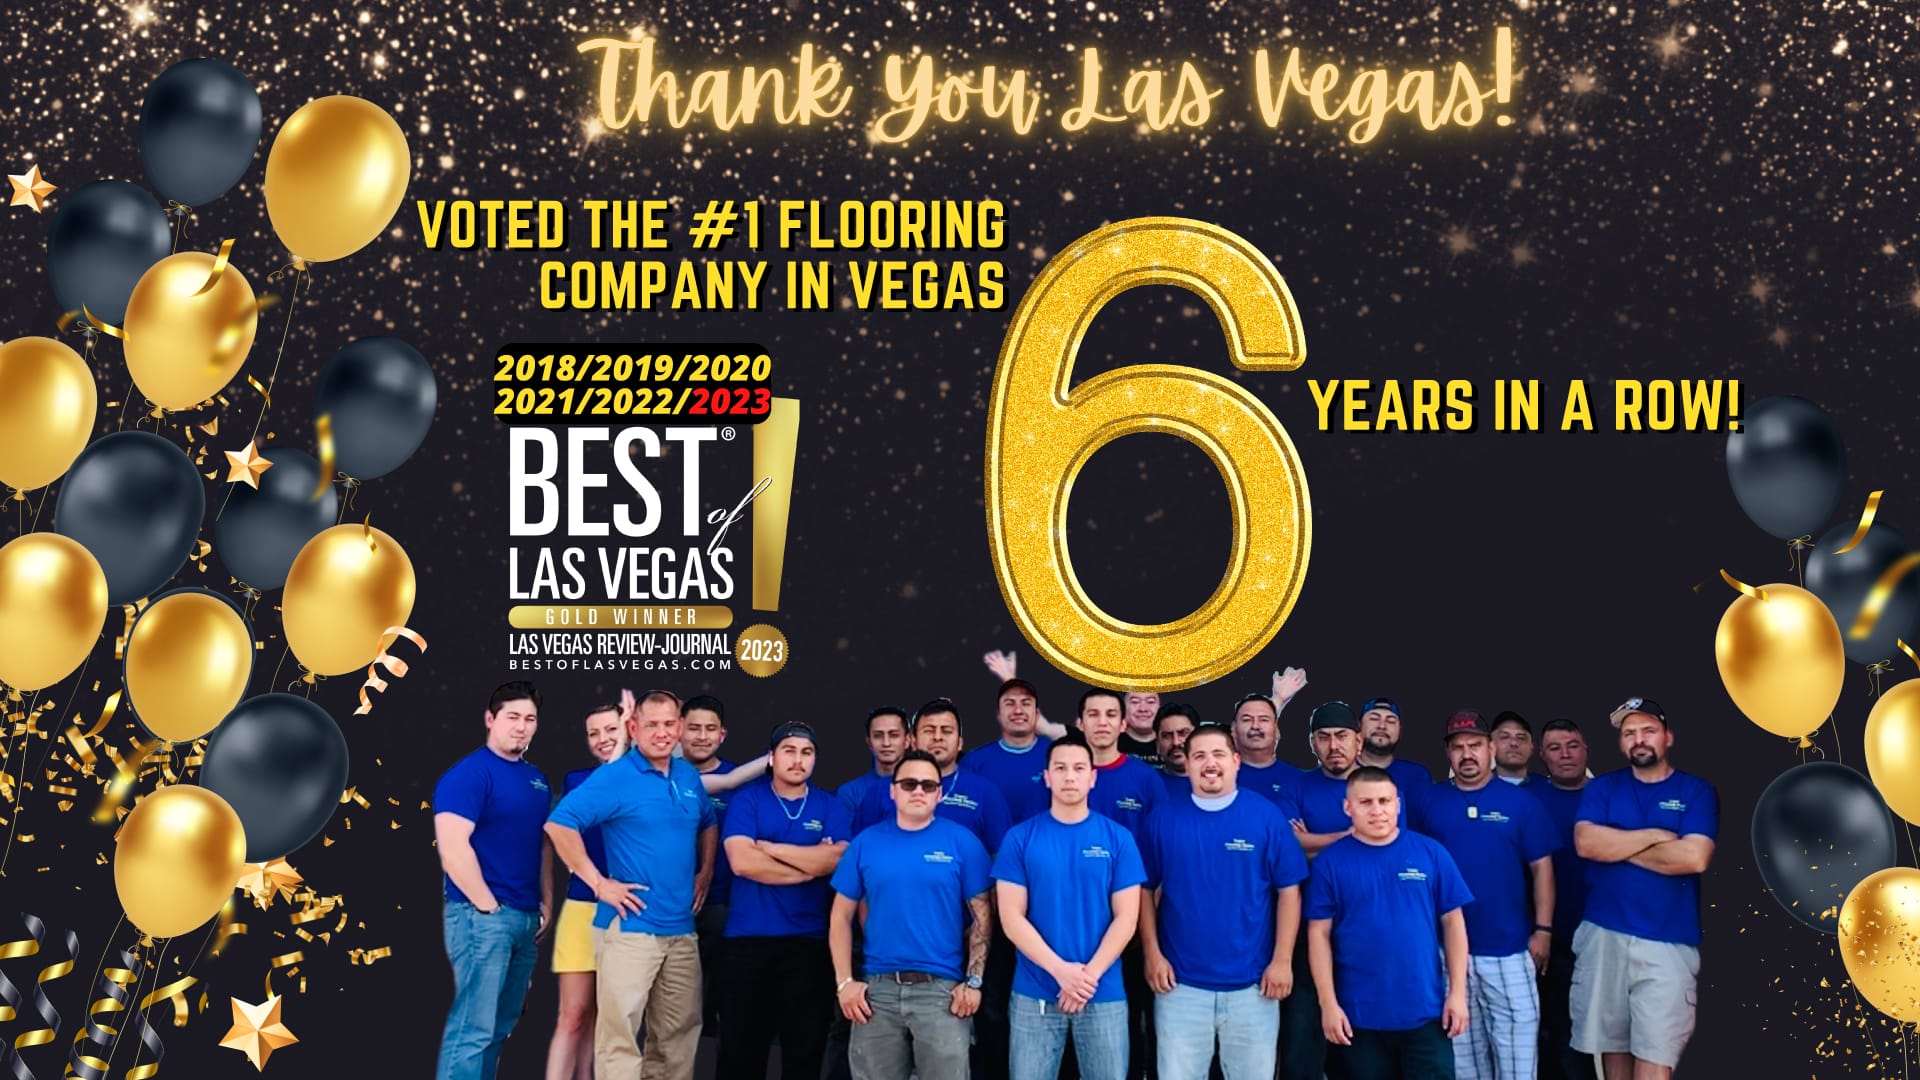 Group Picture Of Vegas Flooring Outlet Employees At The Flooring Store With A Sign That Says 'Voted #1 Flooring Company In Las Vegas 6 Years In A Row